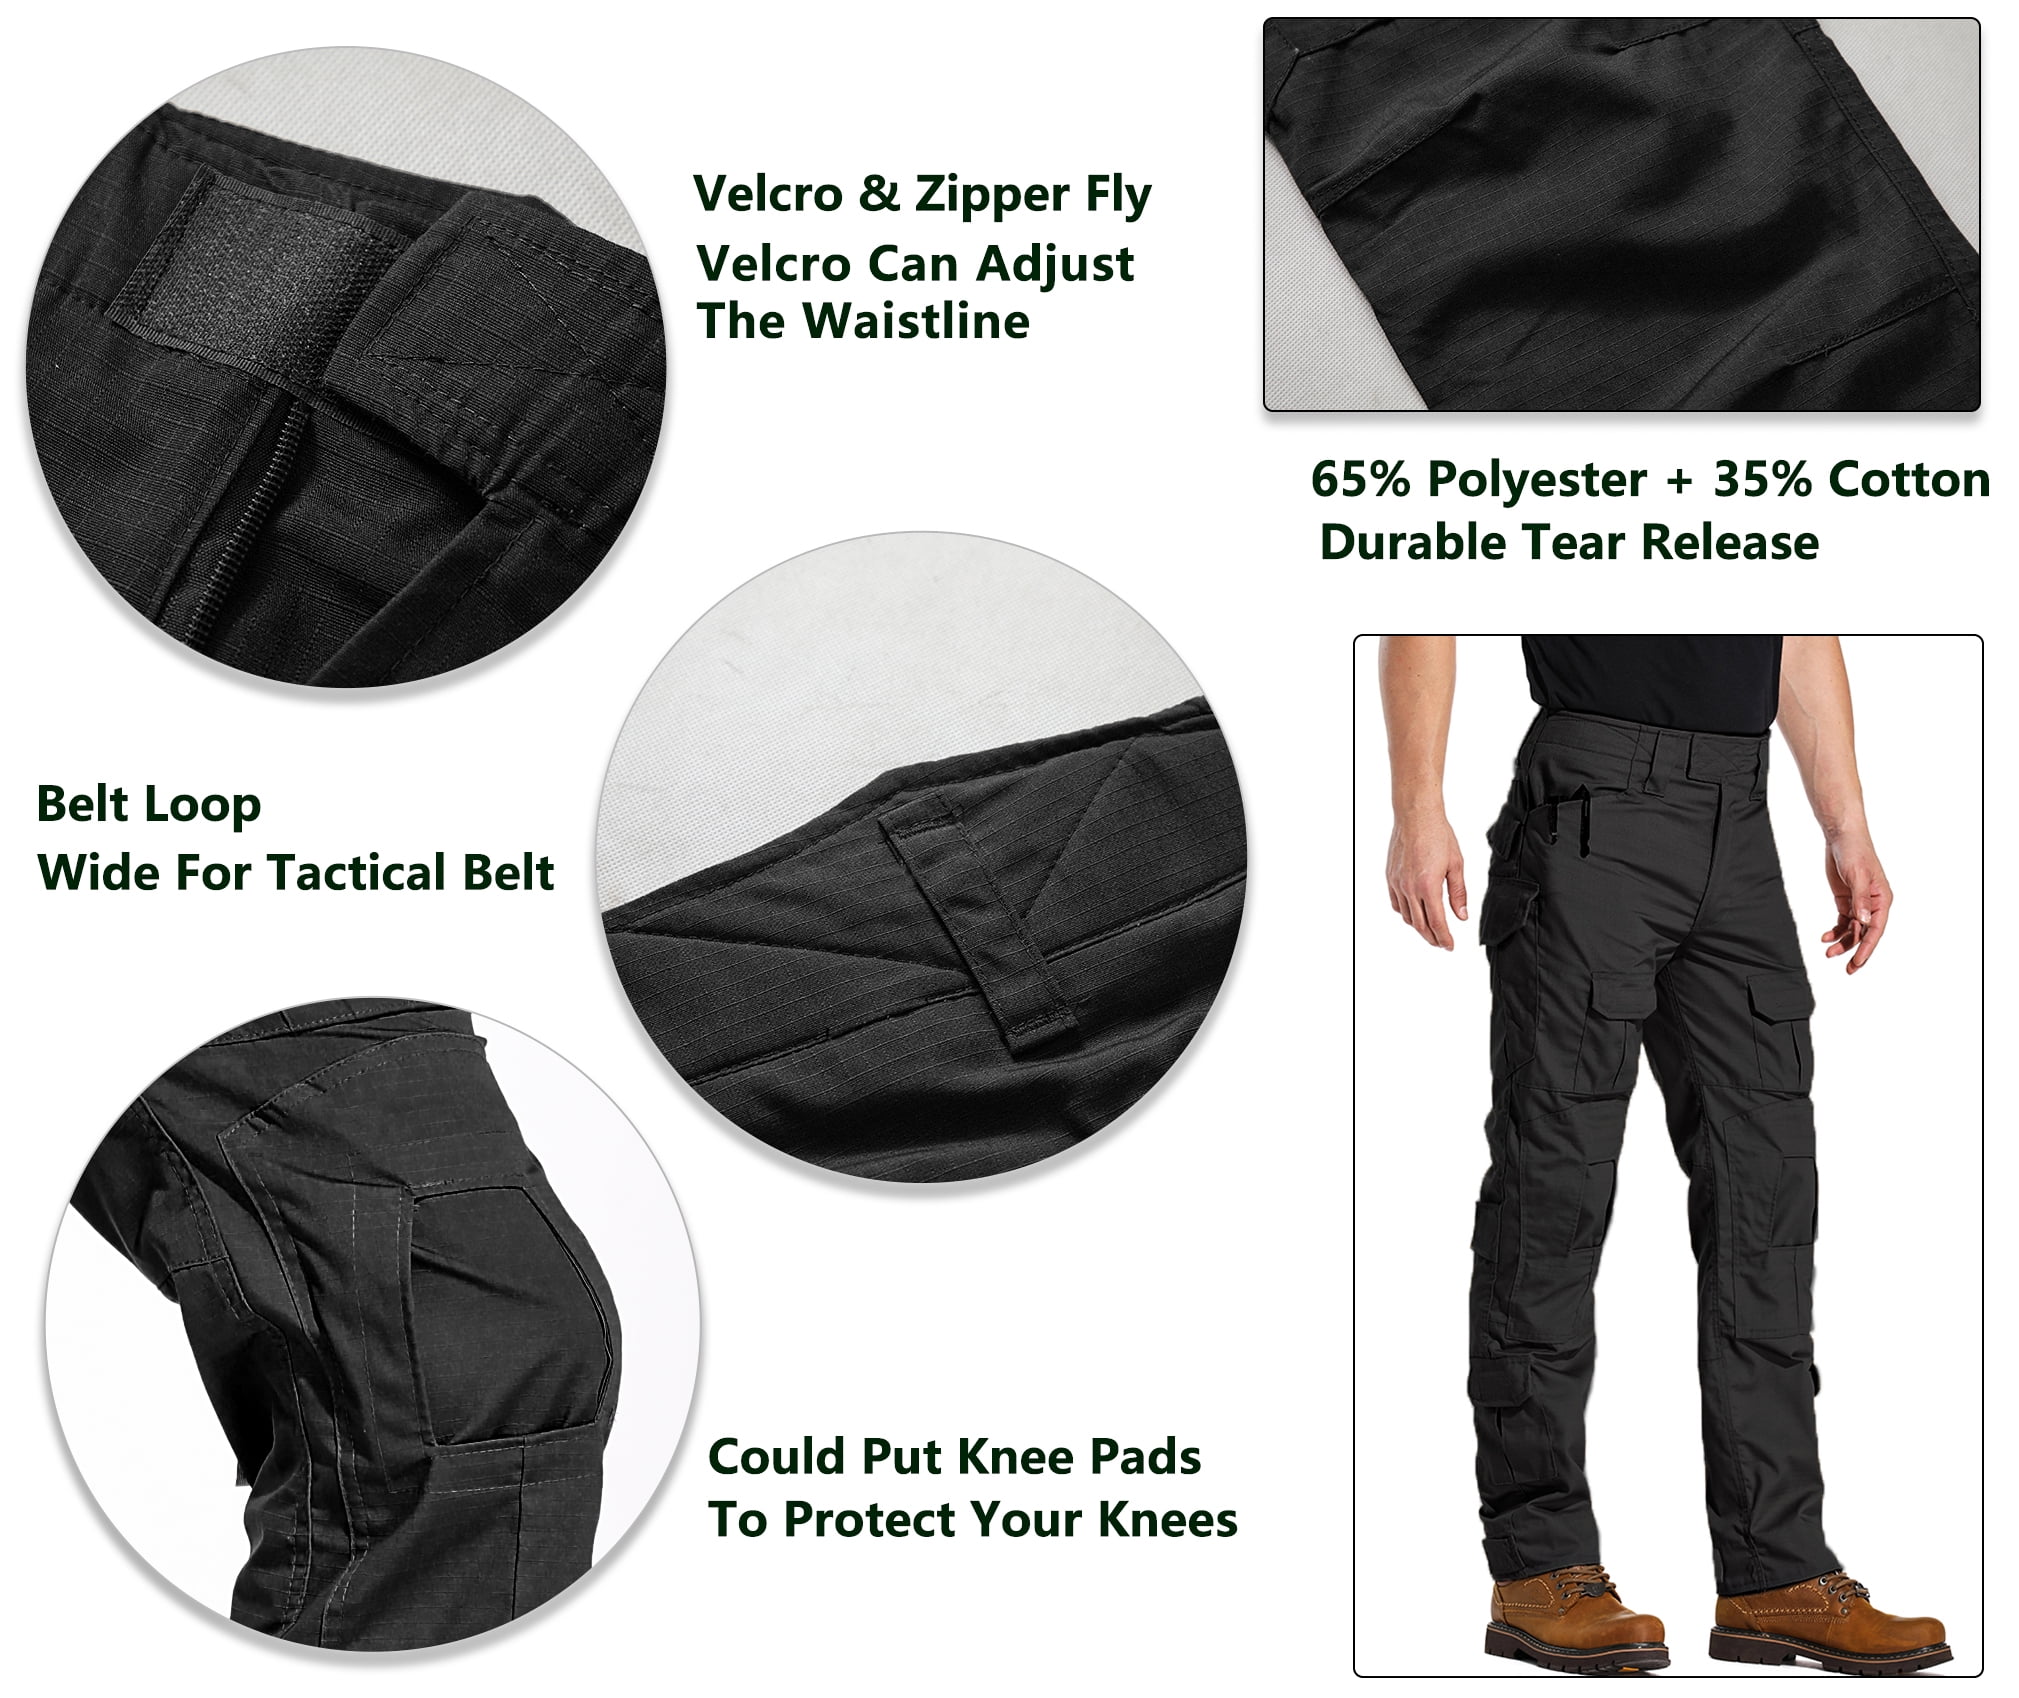 TRGPSG Men's Casual Hiking Pants Multi-Pocket Relaxed Fit Military Army Combat Outdoor Pants Work Cargo Pants 